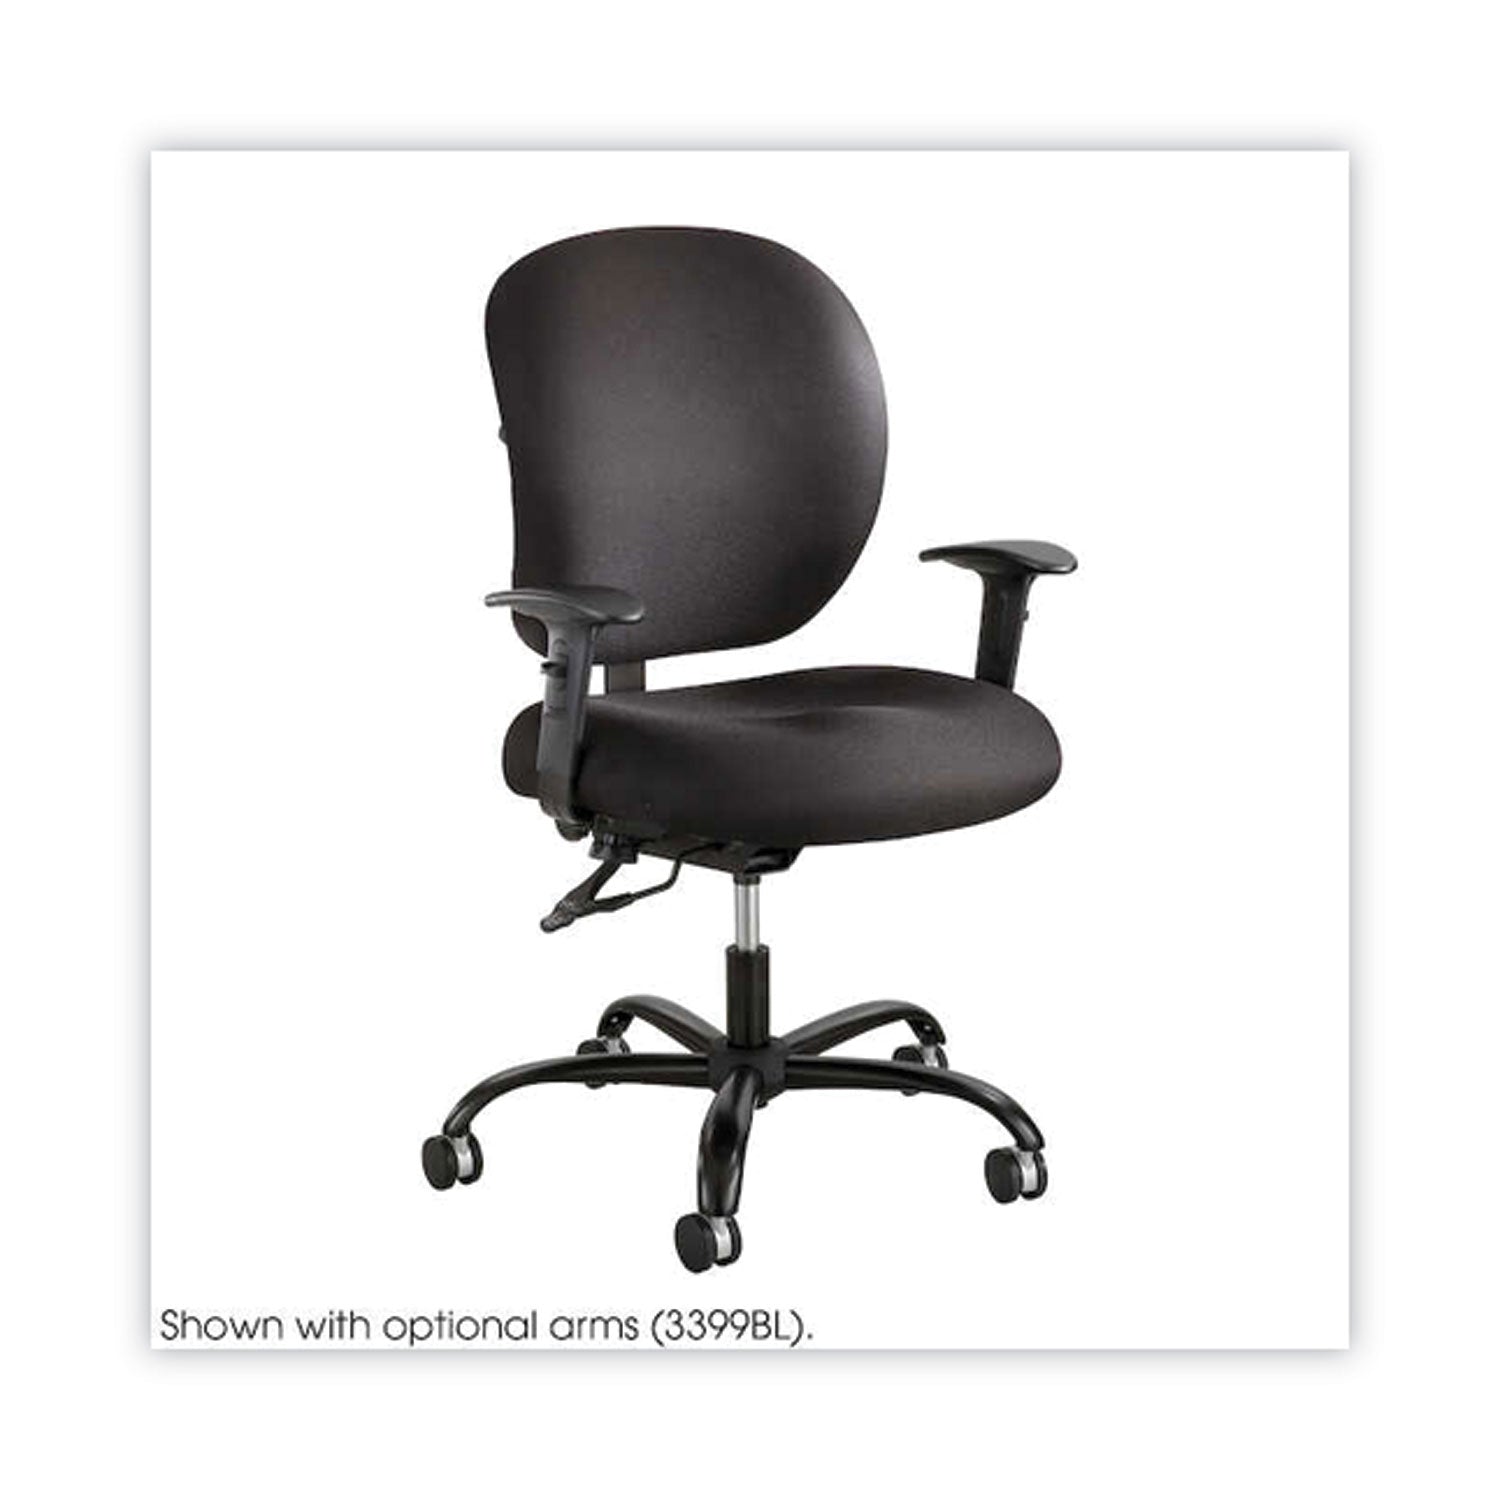 Alday Intensive-Use Chair, Supports Up to 500 lb, 17.5" to 20" Seat Height, Black - 